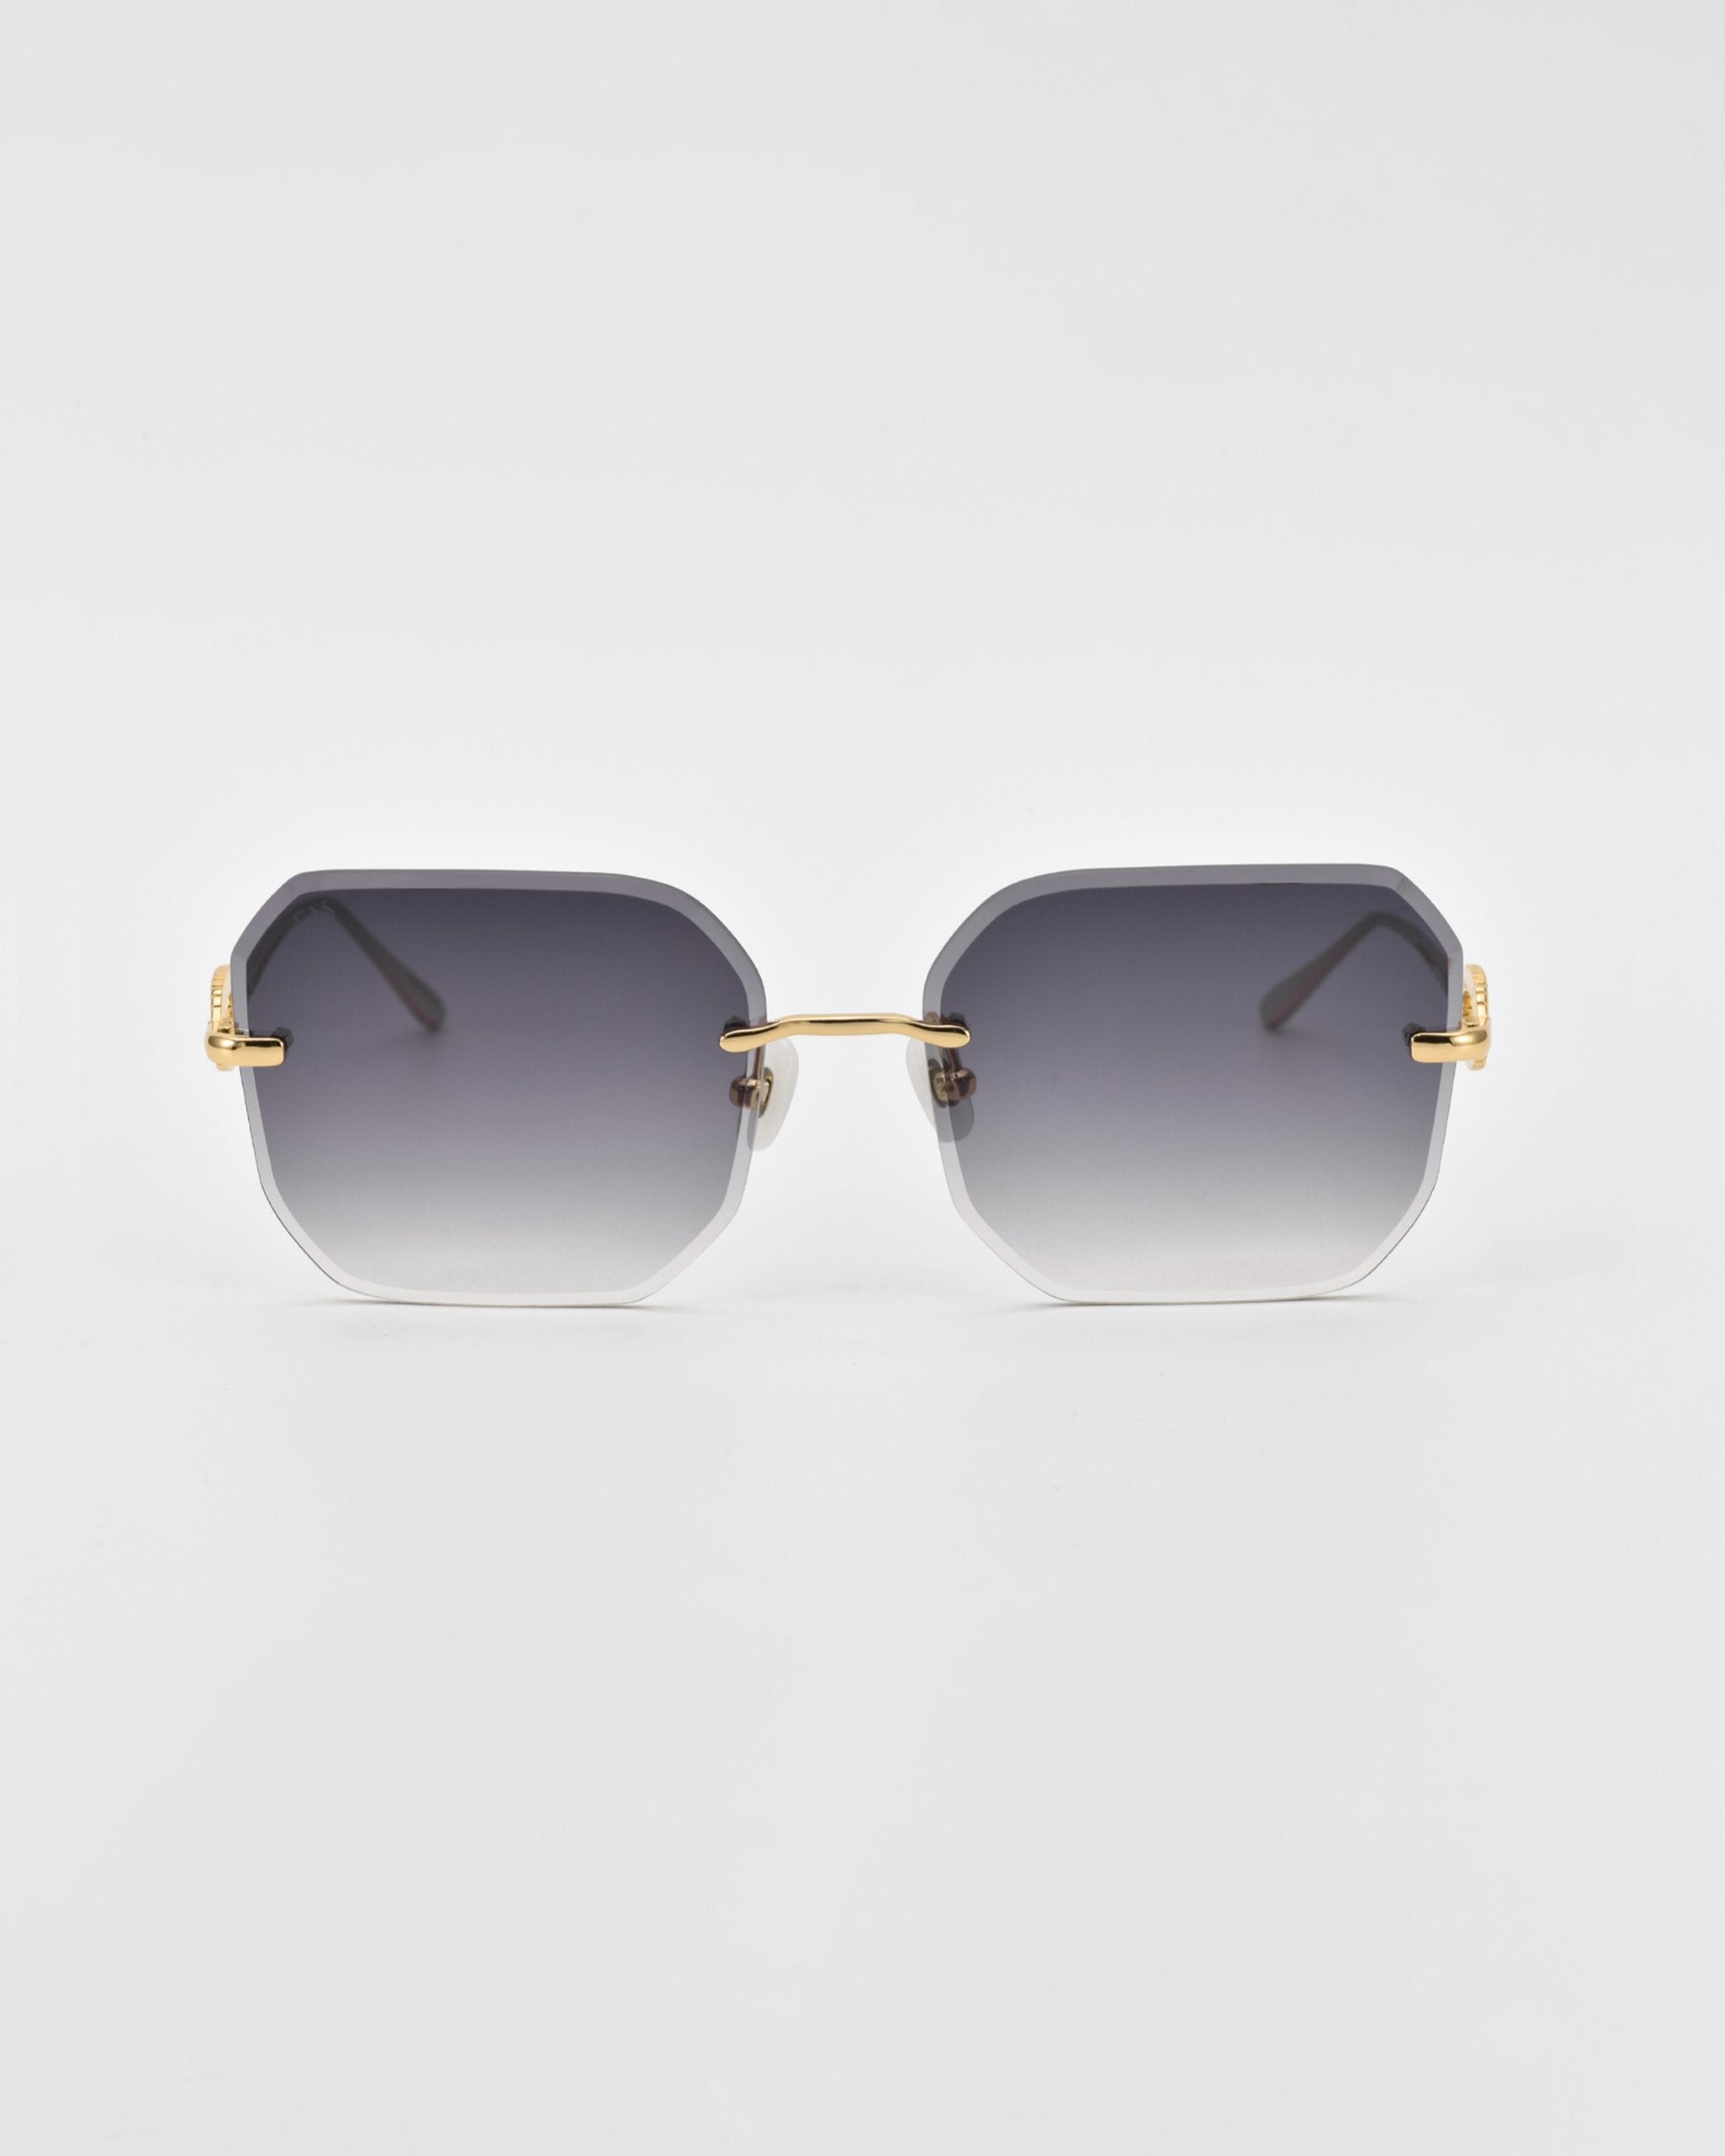 A pair of For Art&#39;s Sake® Aria sunglasses featuring gradient black to clear rectangular frames with gold accents on the hinges and arms is displayed against a white background. The design includes jade-stone nose pads, blending sleek modernity with a stylish and luxurious appearance.